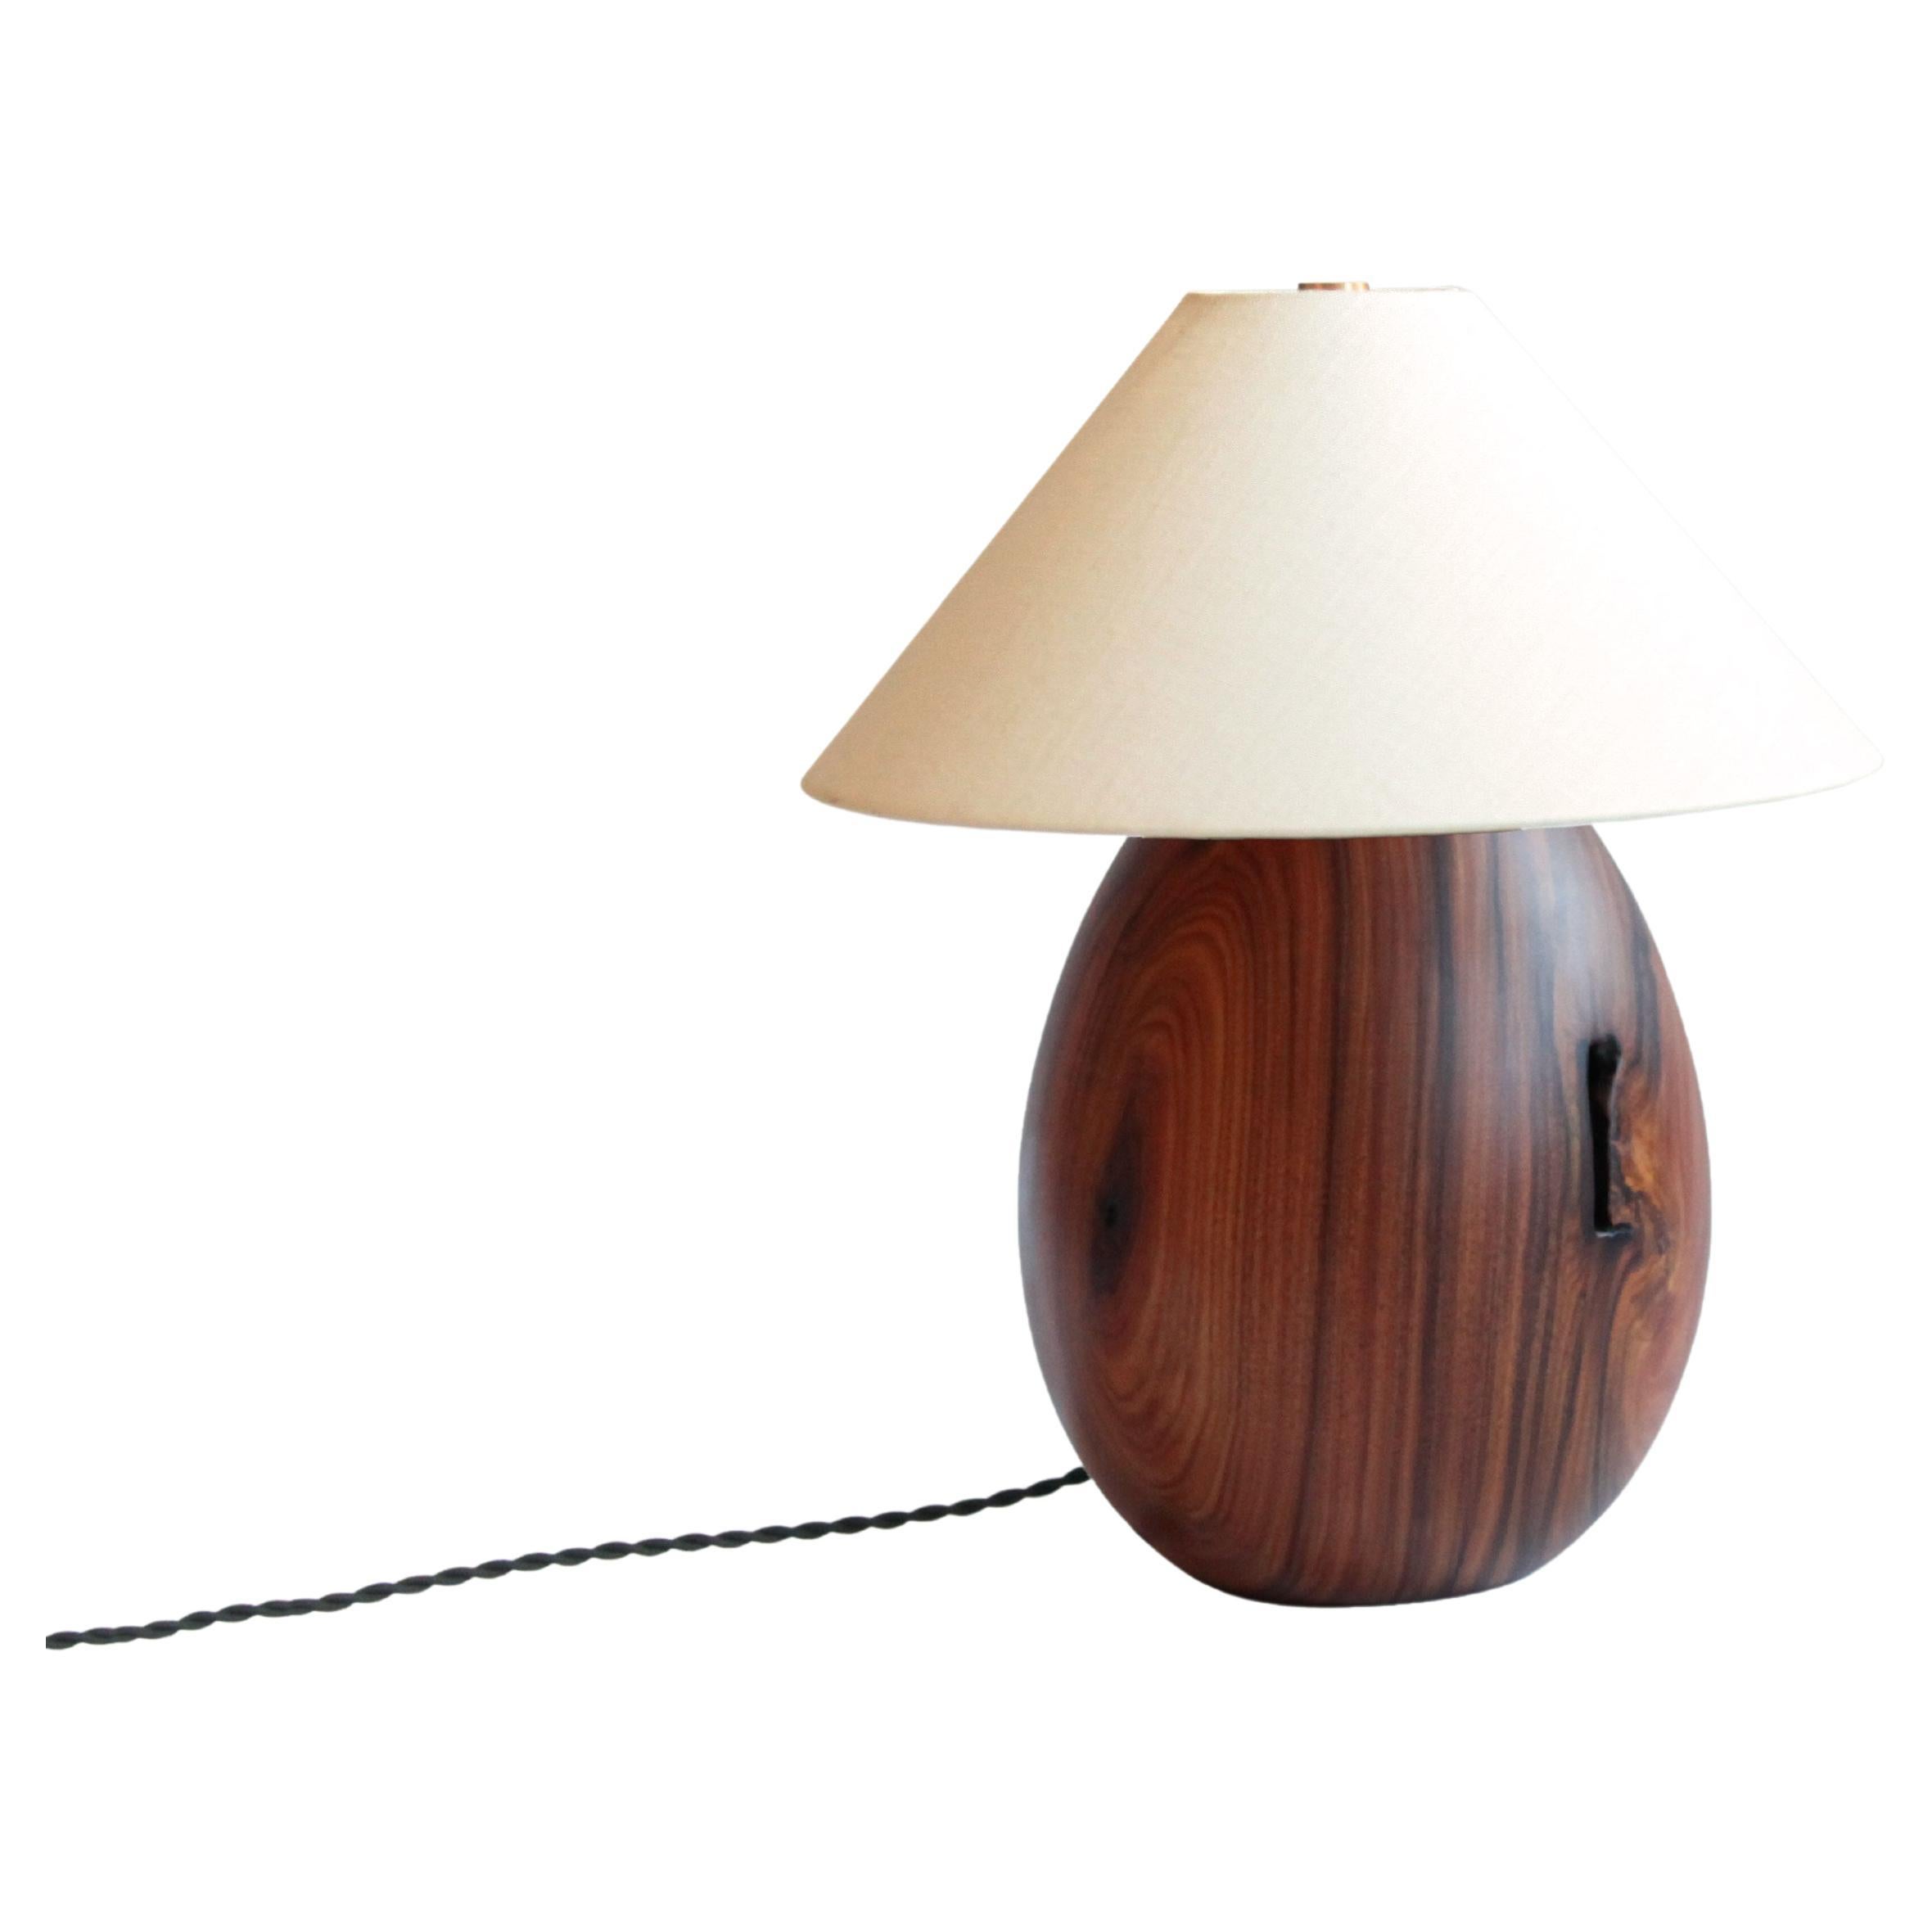 Tropical Hardwood Lamp and White Linen Shade, Small, Árbol Collection, 22